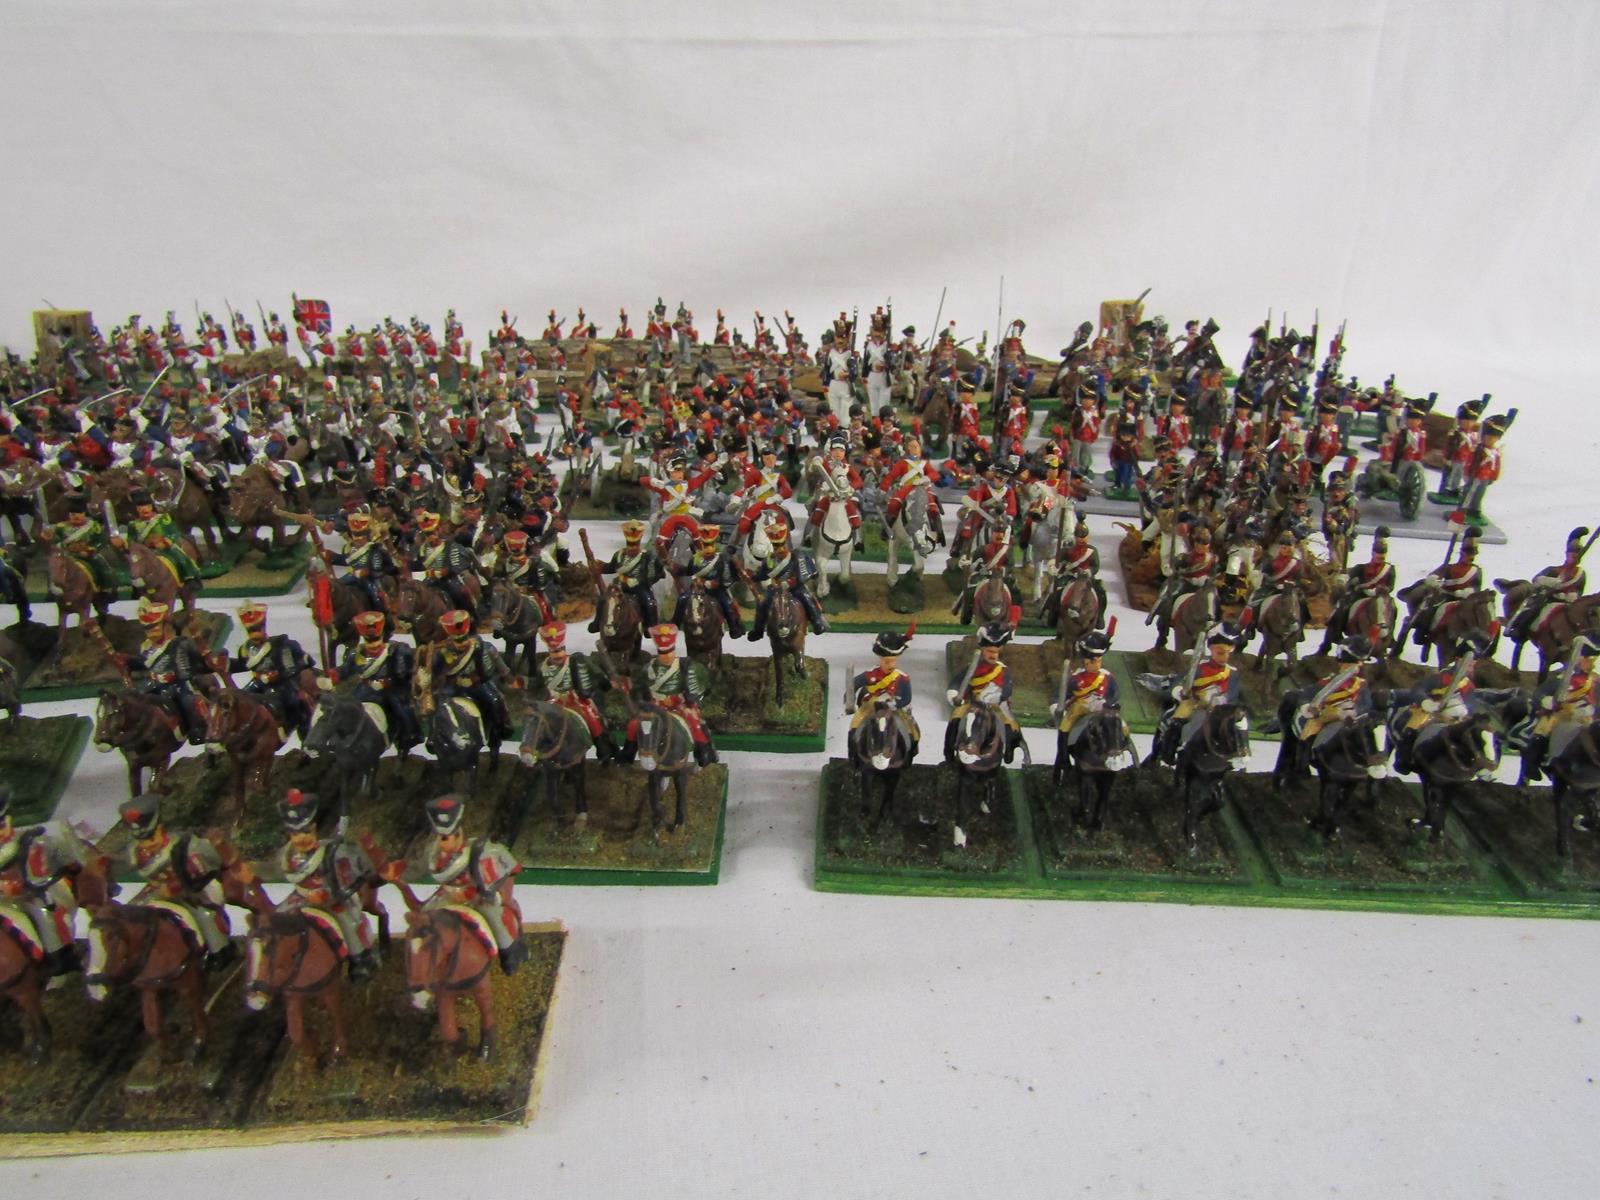 Collection of miniature military figures - some set in scenes - Image 6 of 6